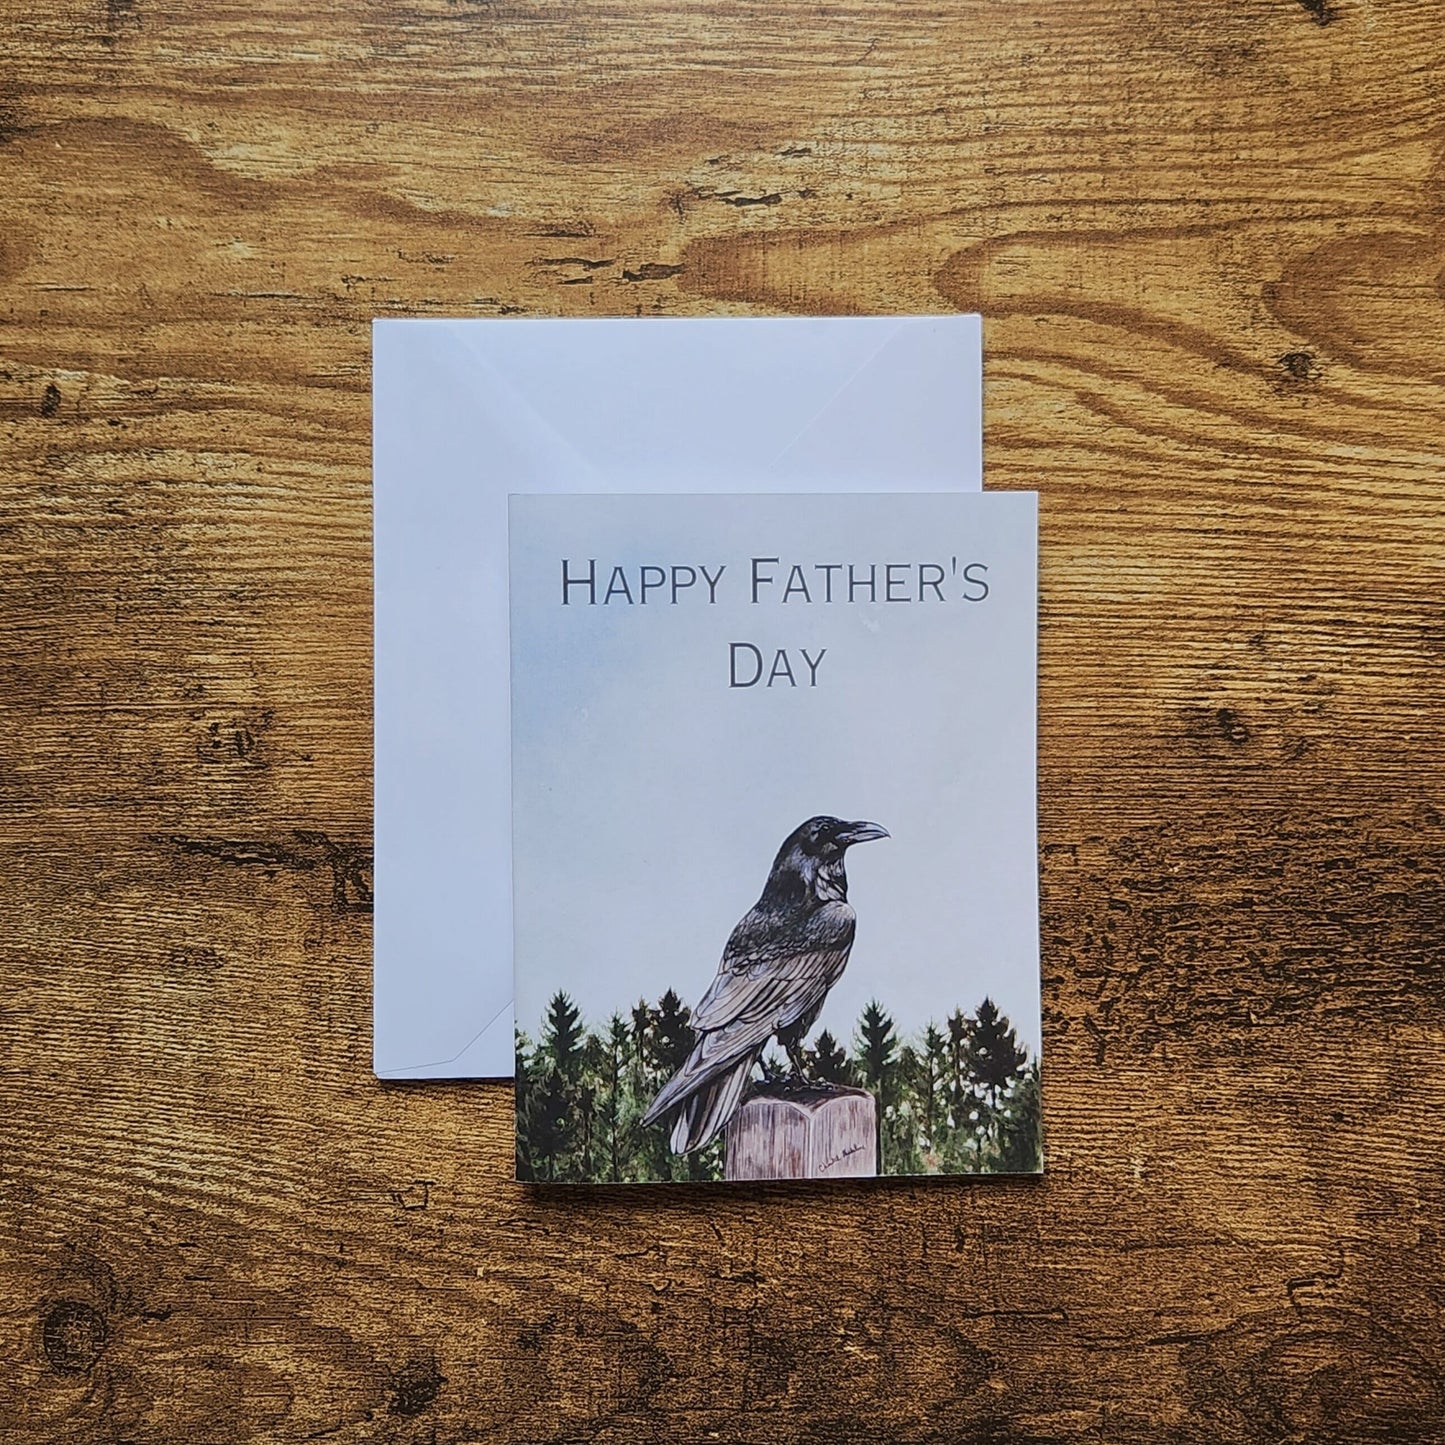 Happy Father's day raven card, Crow gothic card for dad, Bird greeting card for dad, For husband, For grandpa, Nature pine tree outdoor card